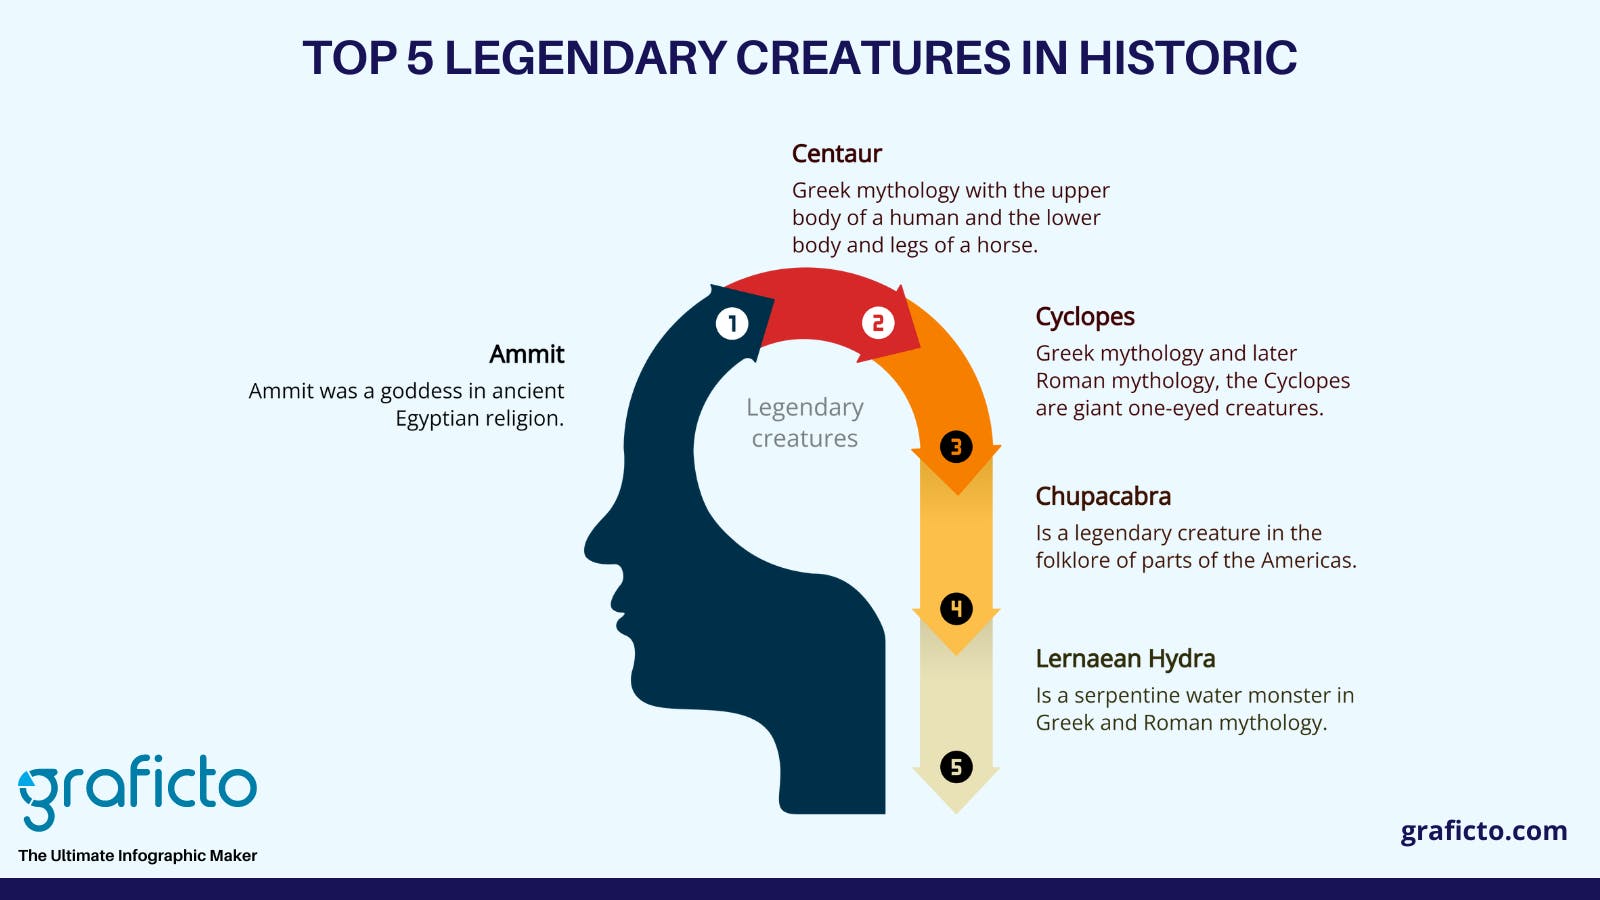 Top 5 legendary creatures in the historic infographic